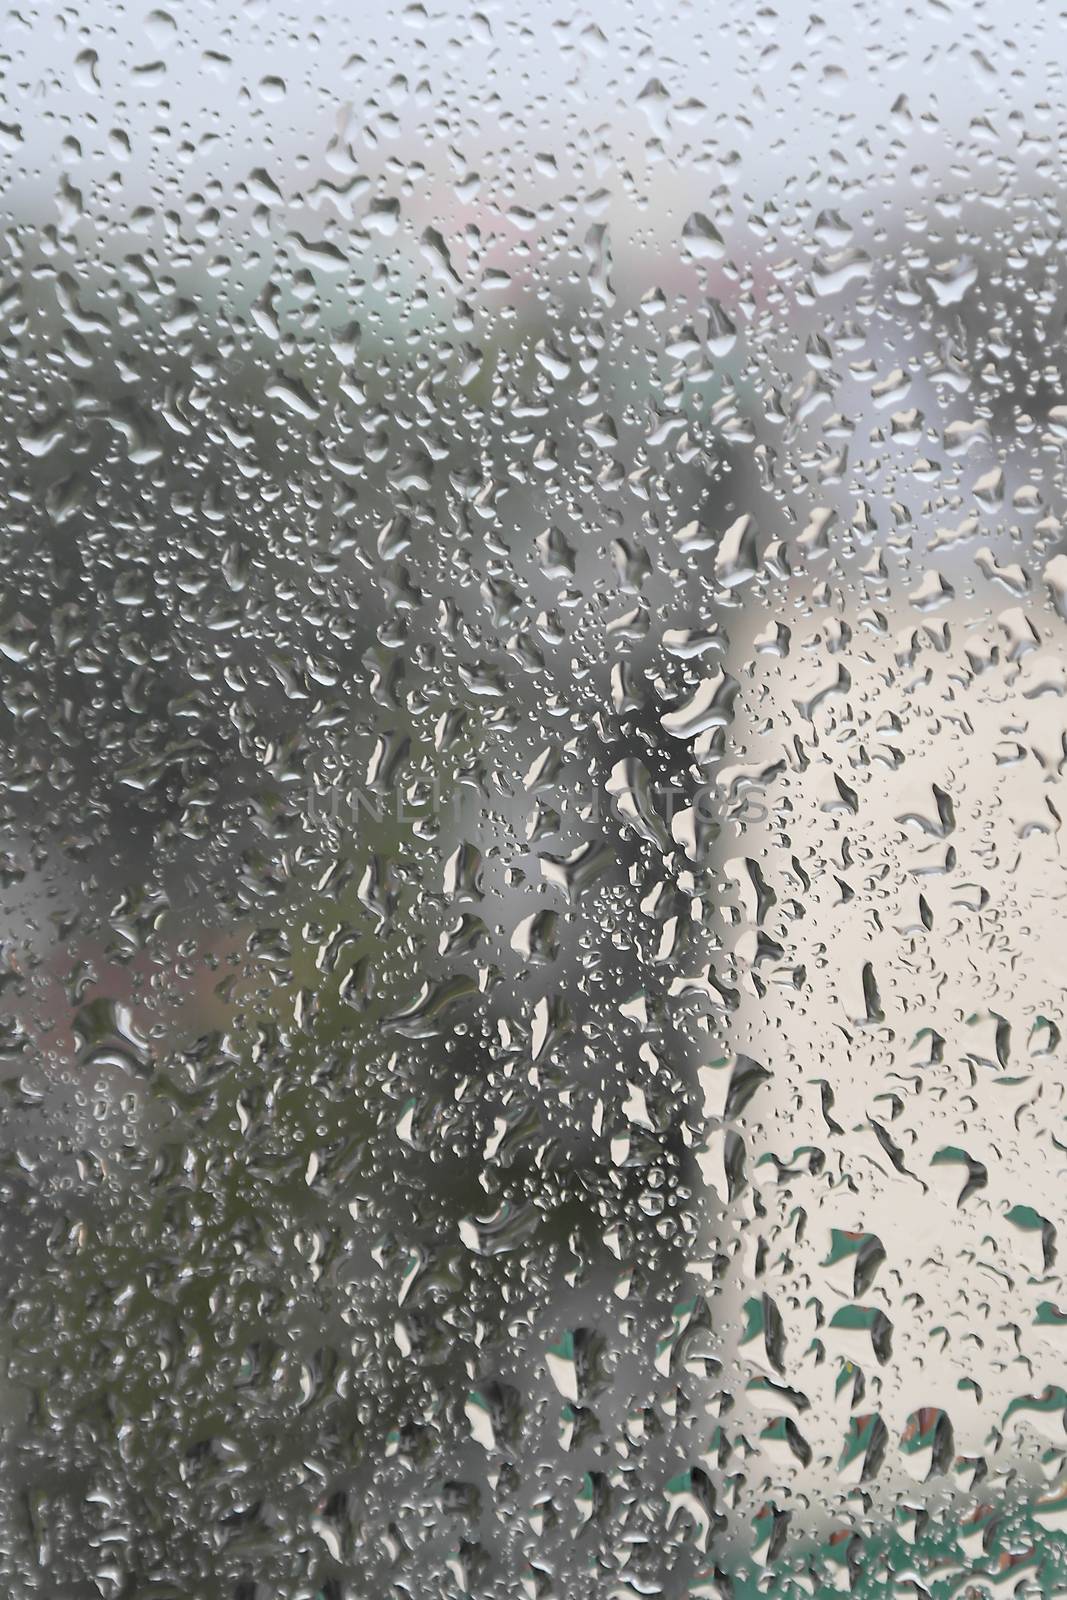 On a summer raining day. Drops of water on the window. Shallow DOF